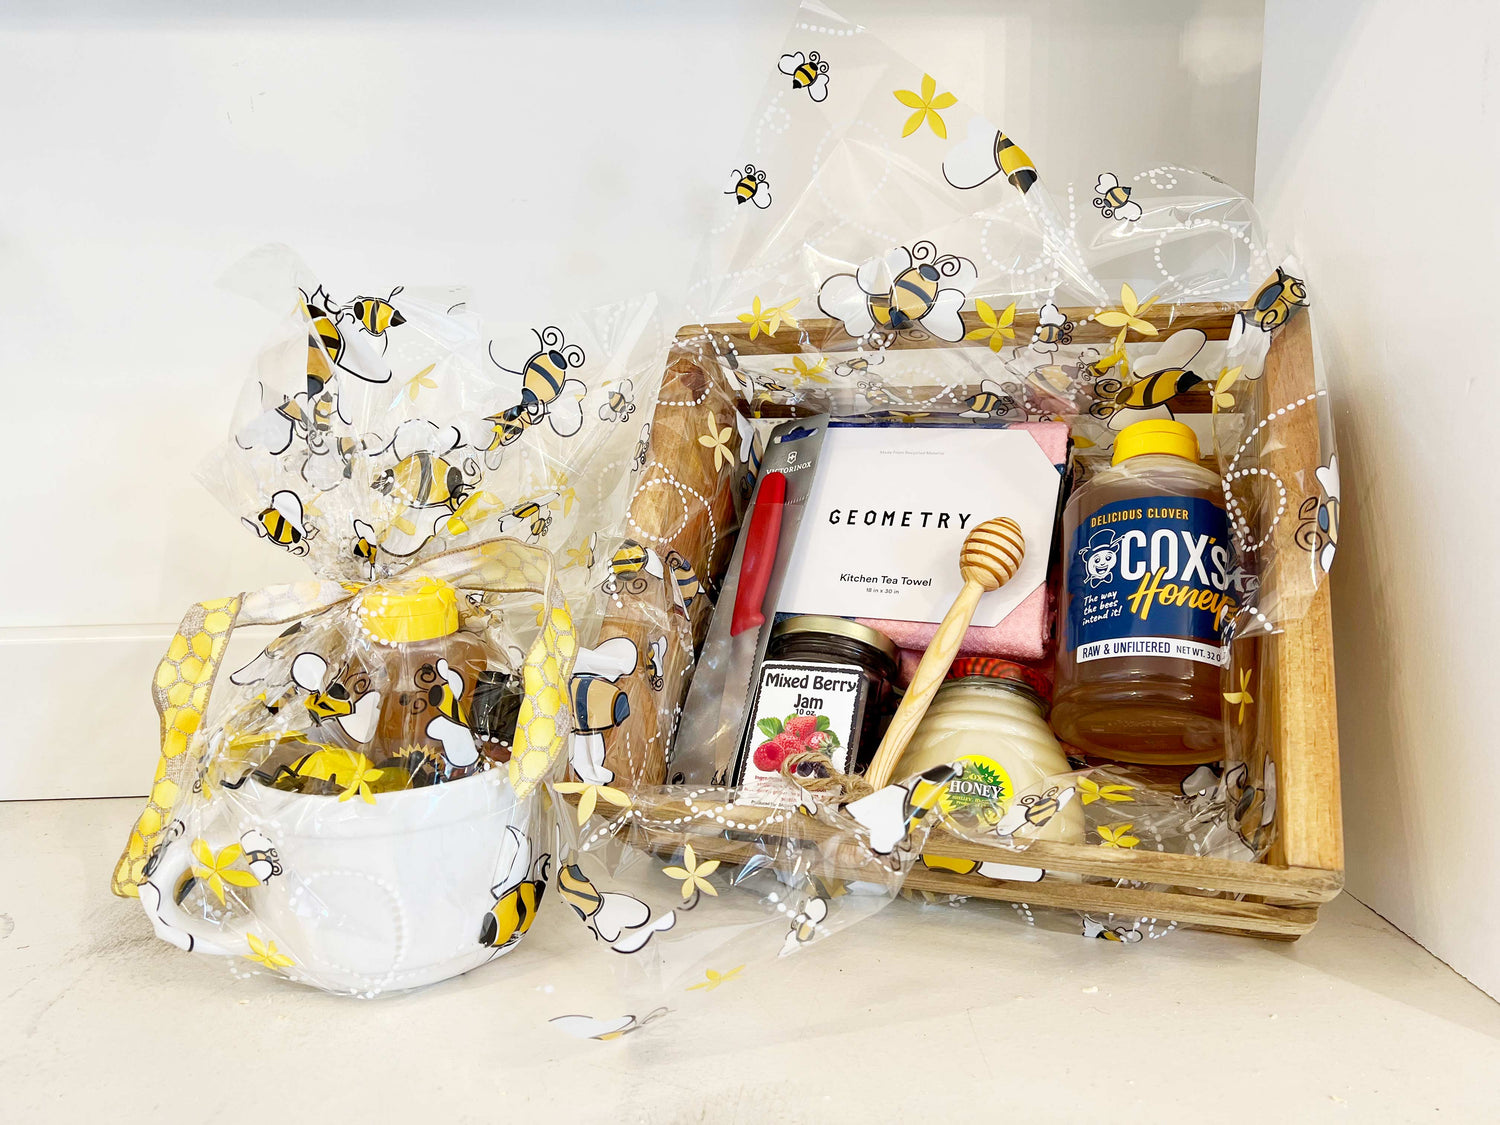 Coxs Honey Stand Gift Station. Make your own gifts. Choose a container or box, browse our honey stand, pick your favorites and decorate it. Take it home or we can mail it for you.